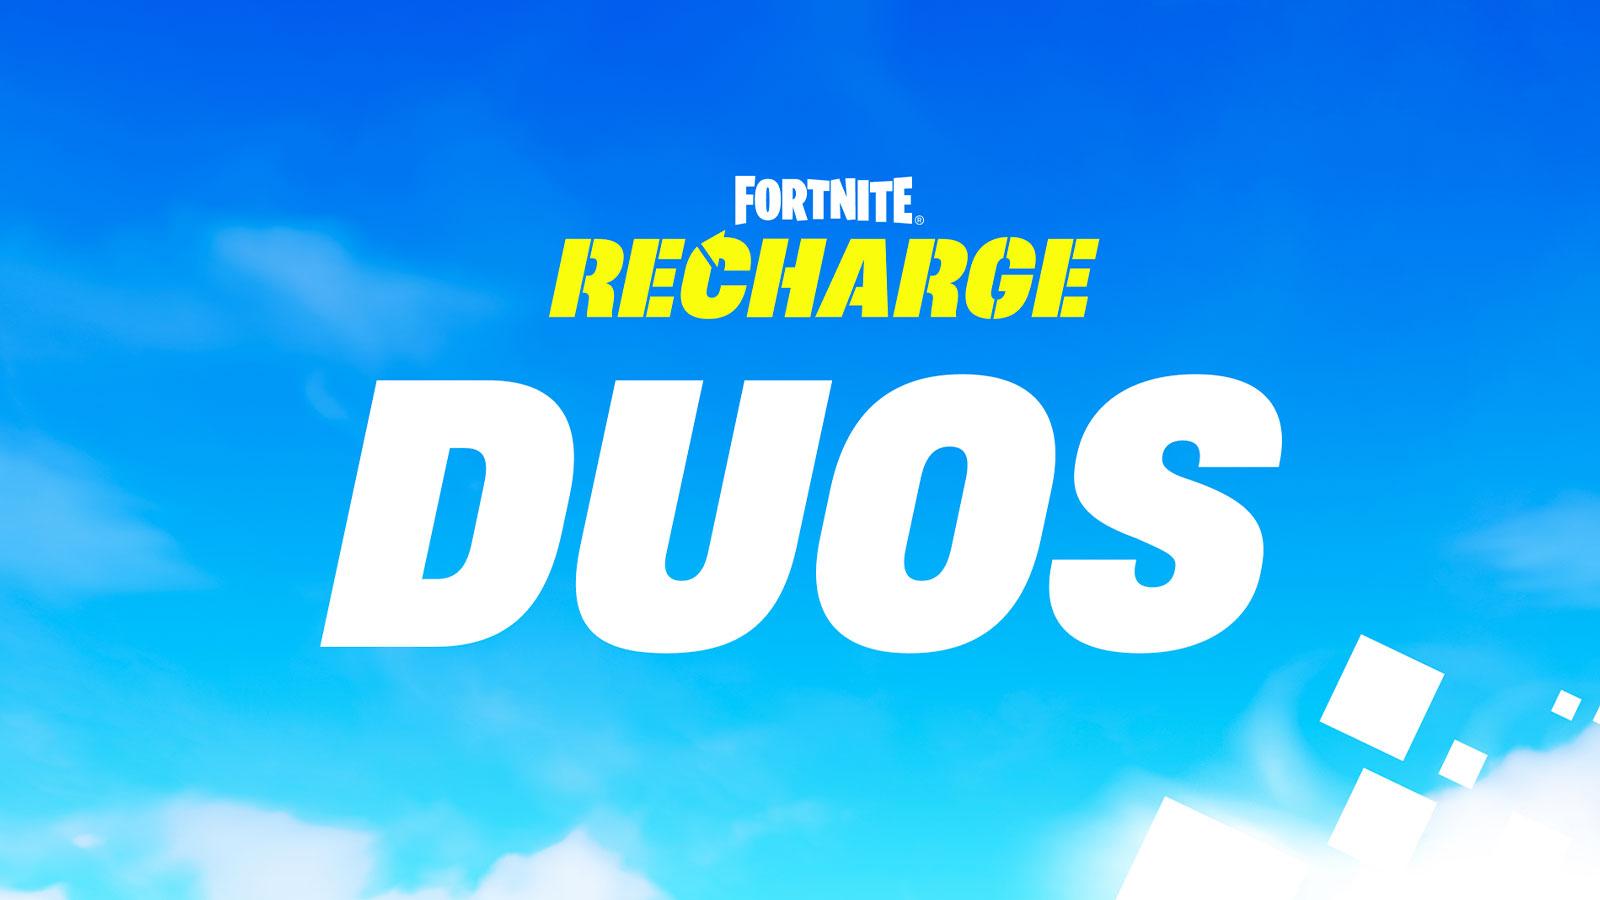 Fortnite Recharge Duos